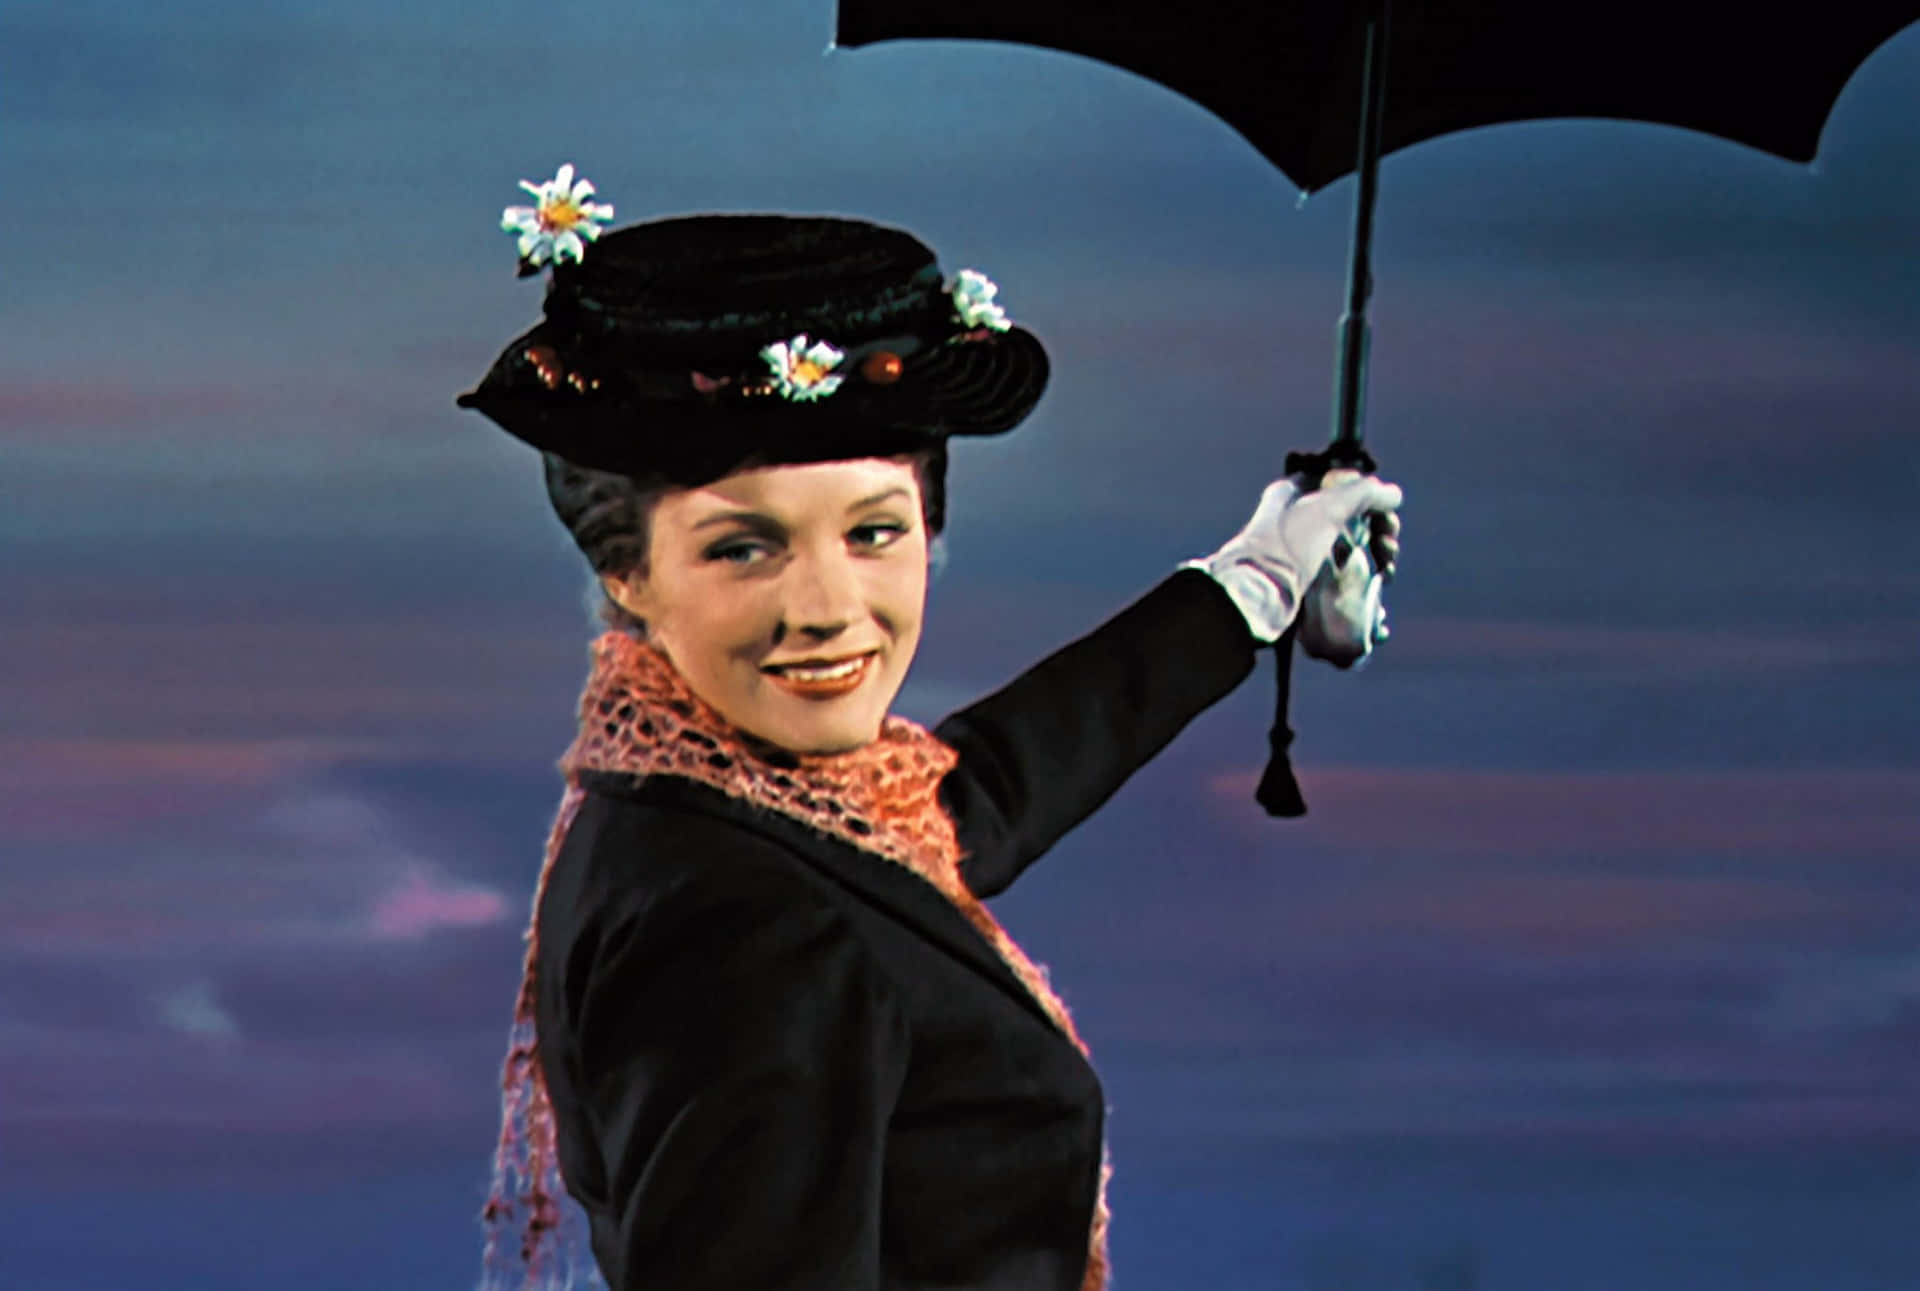 Mary Poppins Flying With Umbrella Background